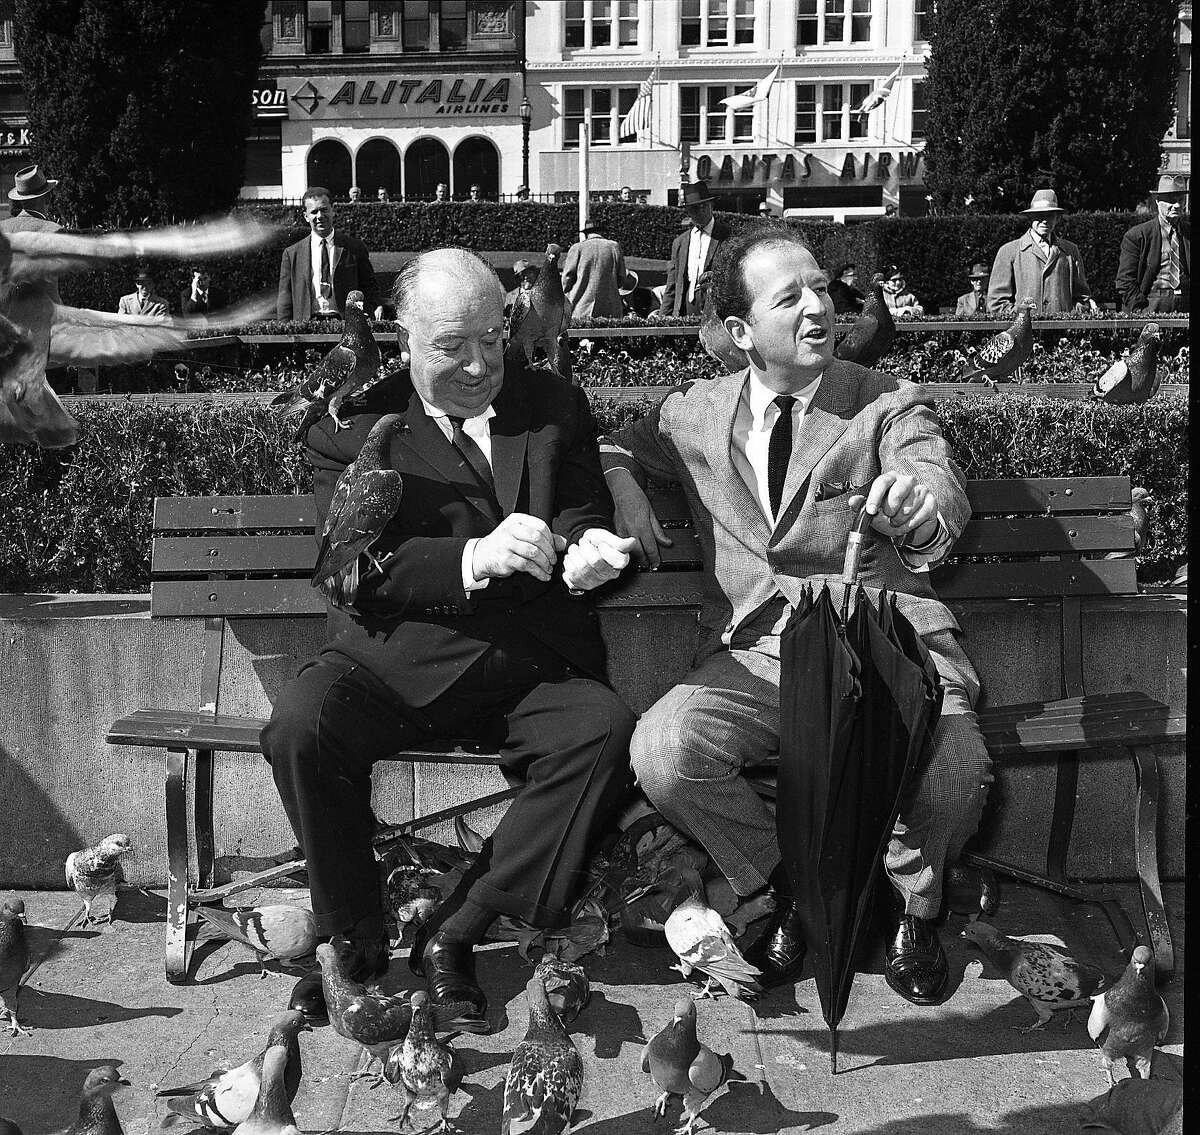 April 1, 1963: Herb Caen and Alfred Hitchcock feed the pigeons in Union Square during a promotion for Hitchcock's movie "The Birds."